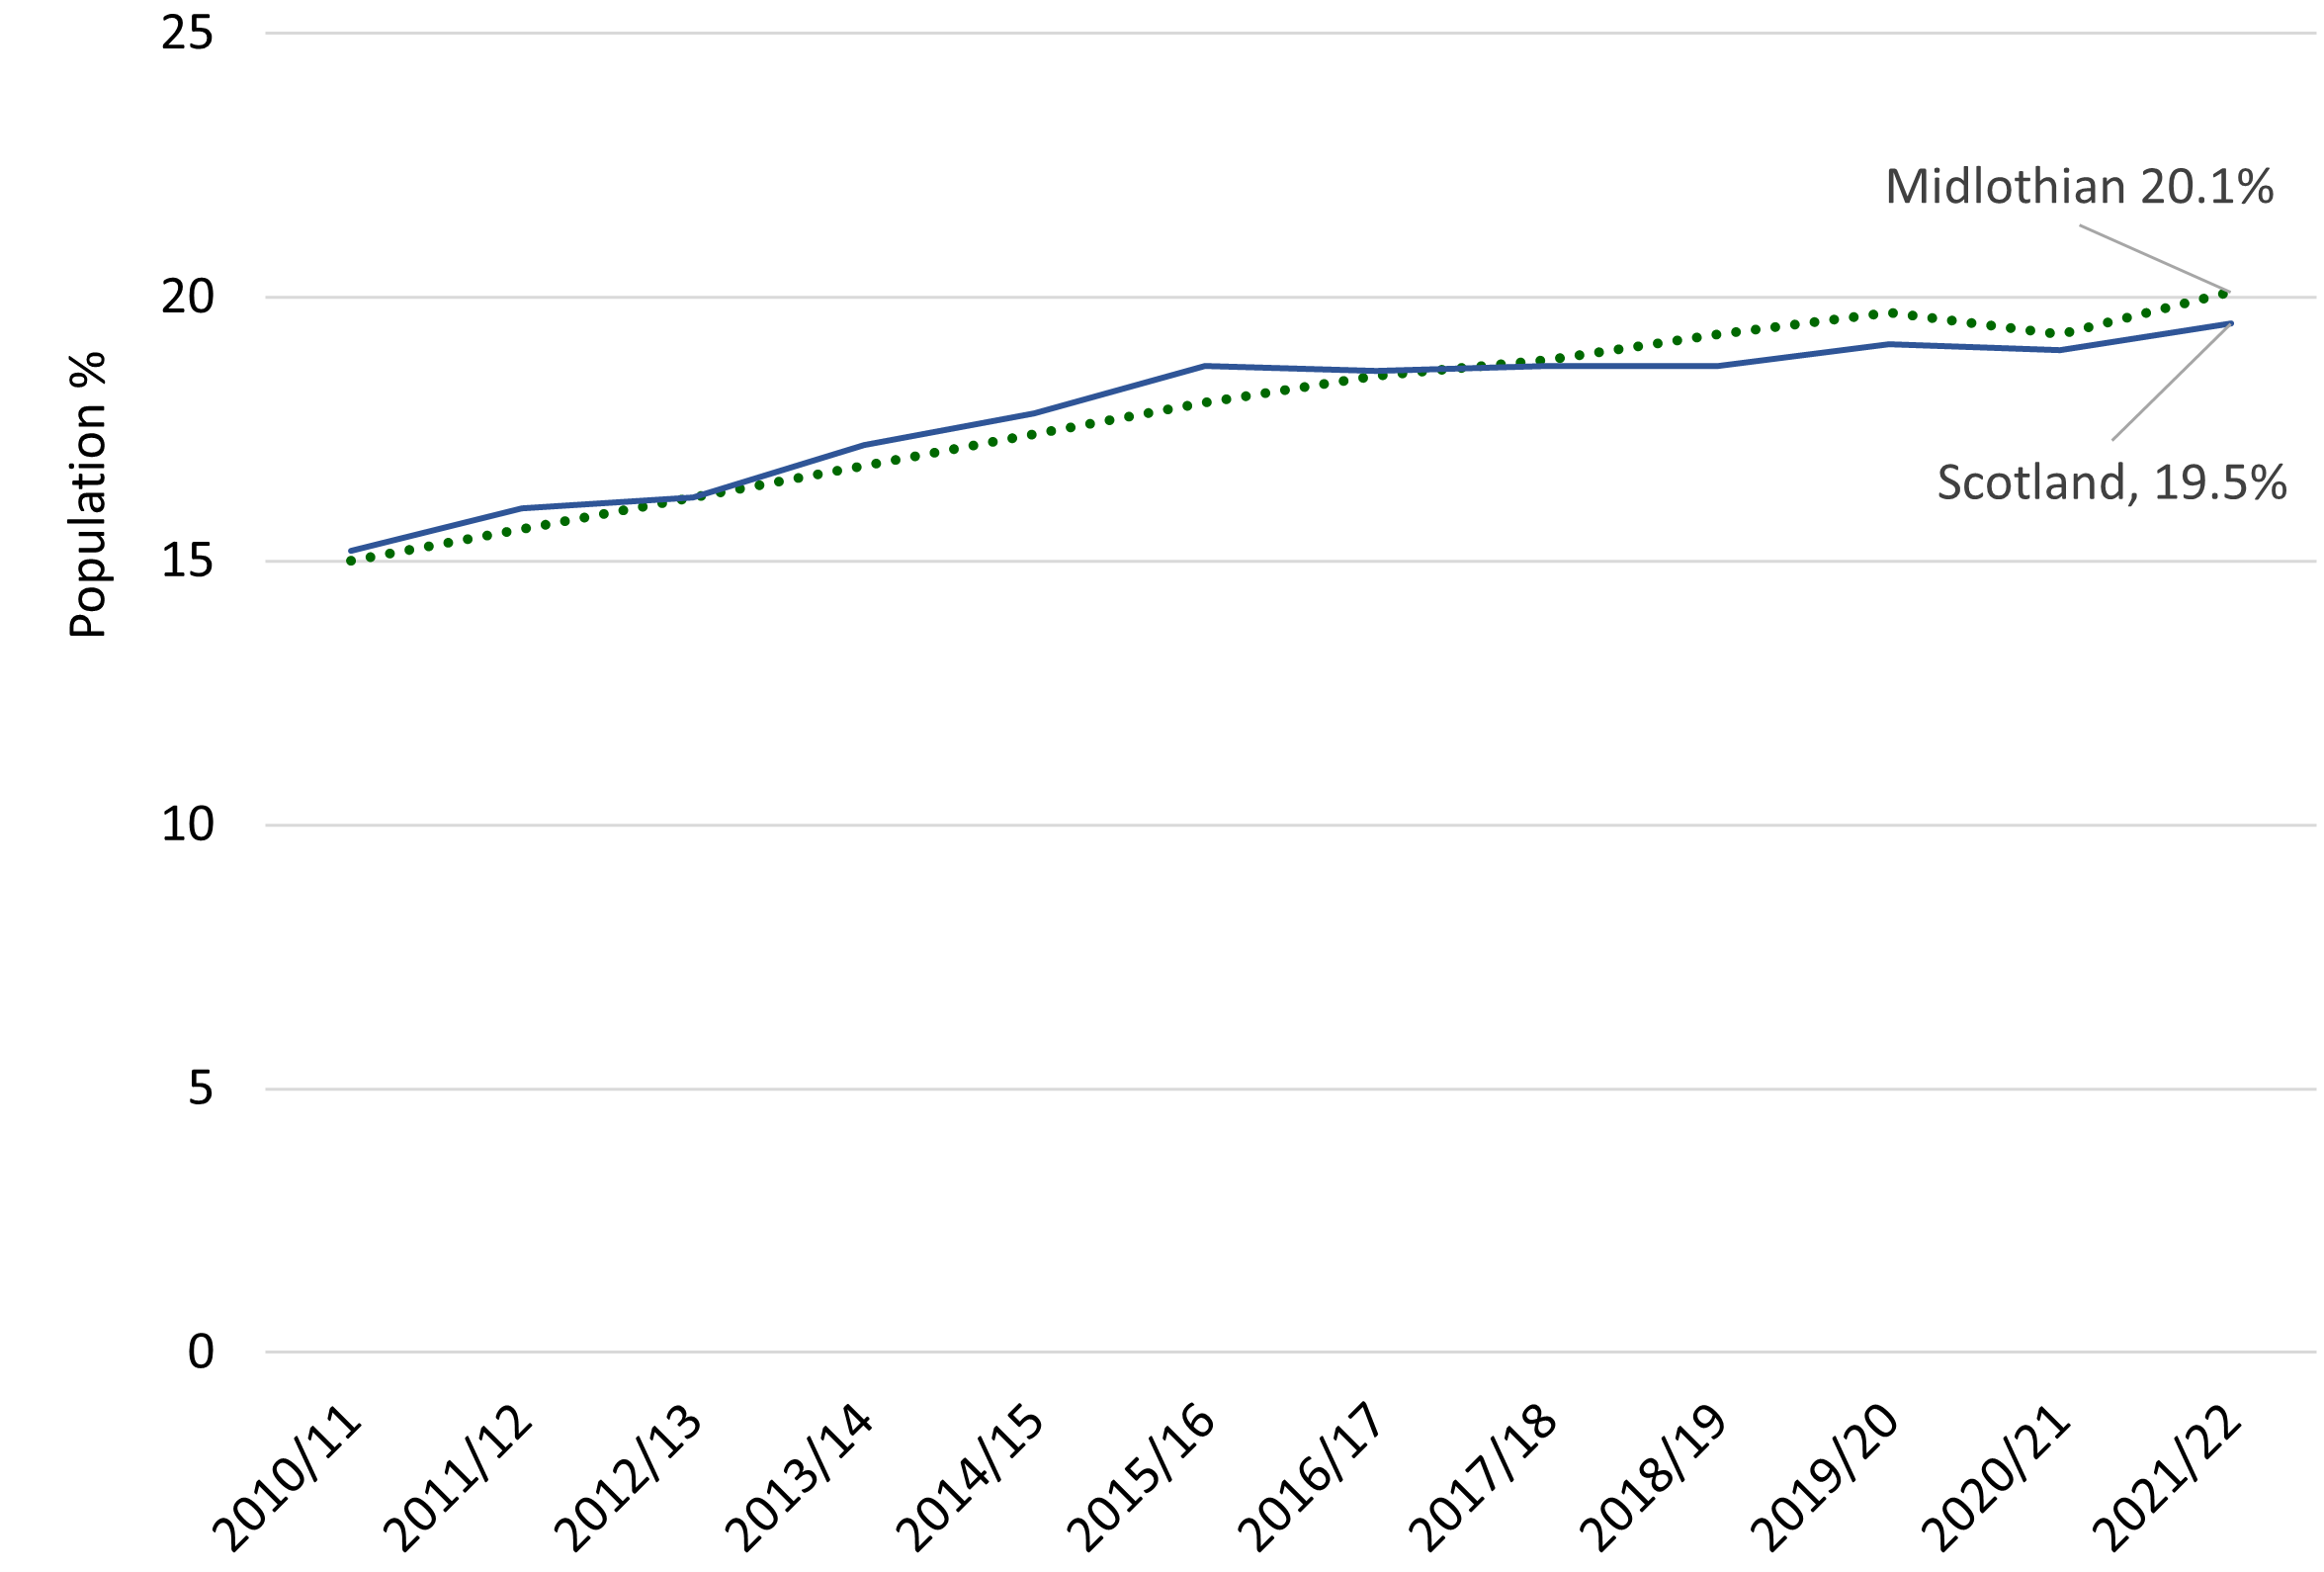 Line chart showing a steady increase in the percentage of population prescribed drugs for depression, anxiety and /or psychosis in Midlothian and Scotland from 2010/11 to 2021/22. In Midlothian this has increased from 15% in 2010/11 to 20.1% in 2021/22.